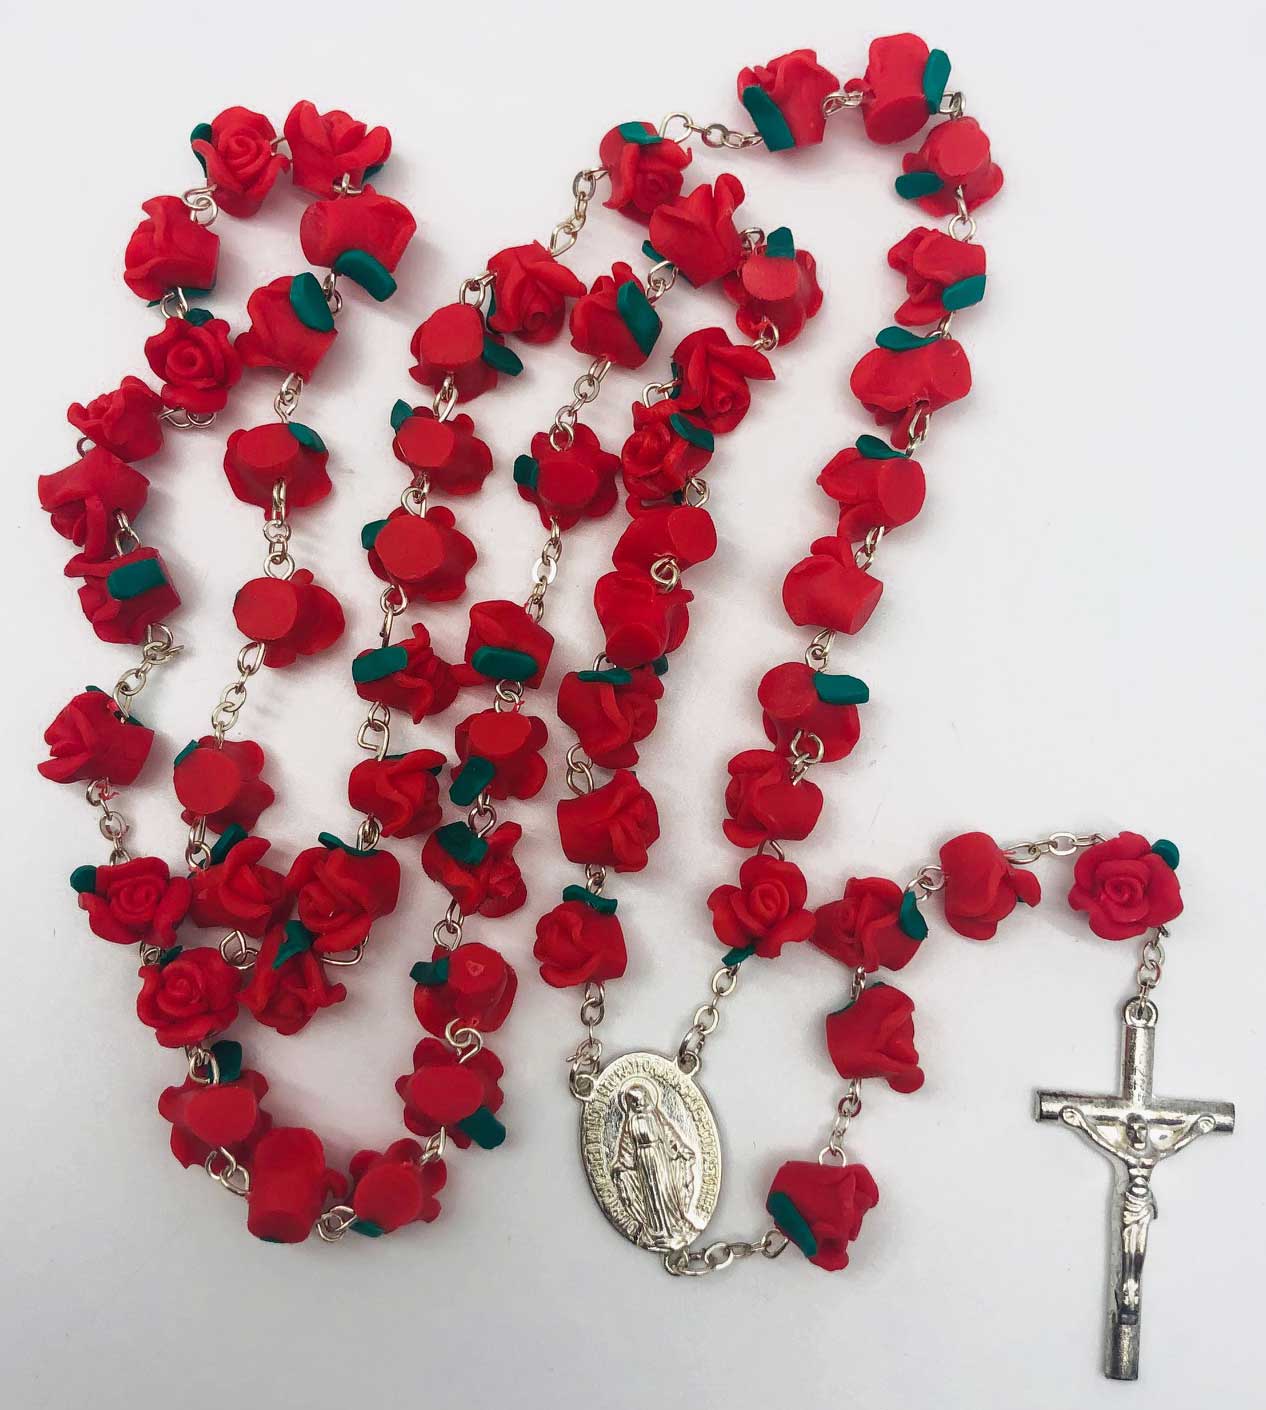 10 Sets Rosary Cross and Center Sets for Rosary Bead Necklace